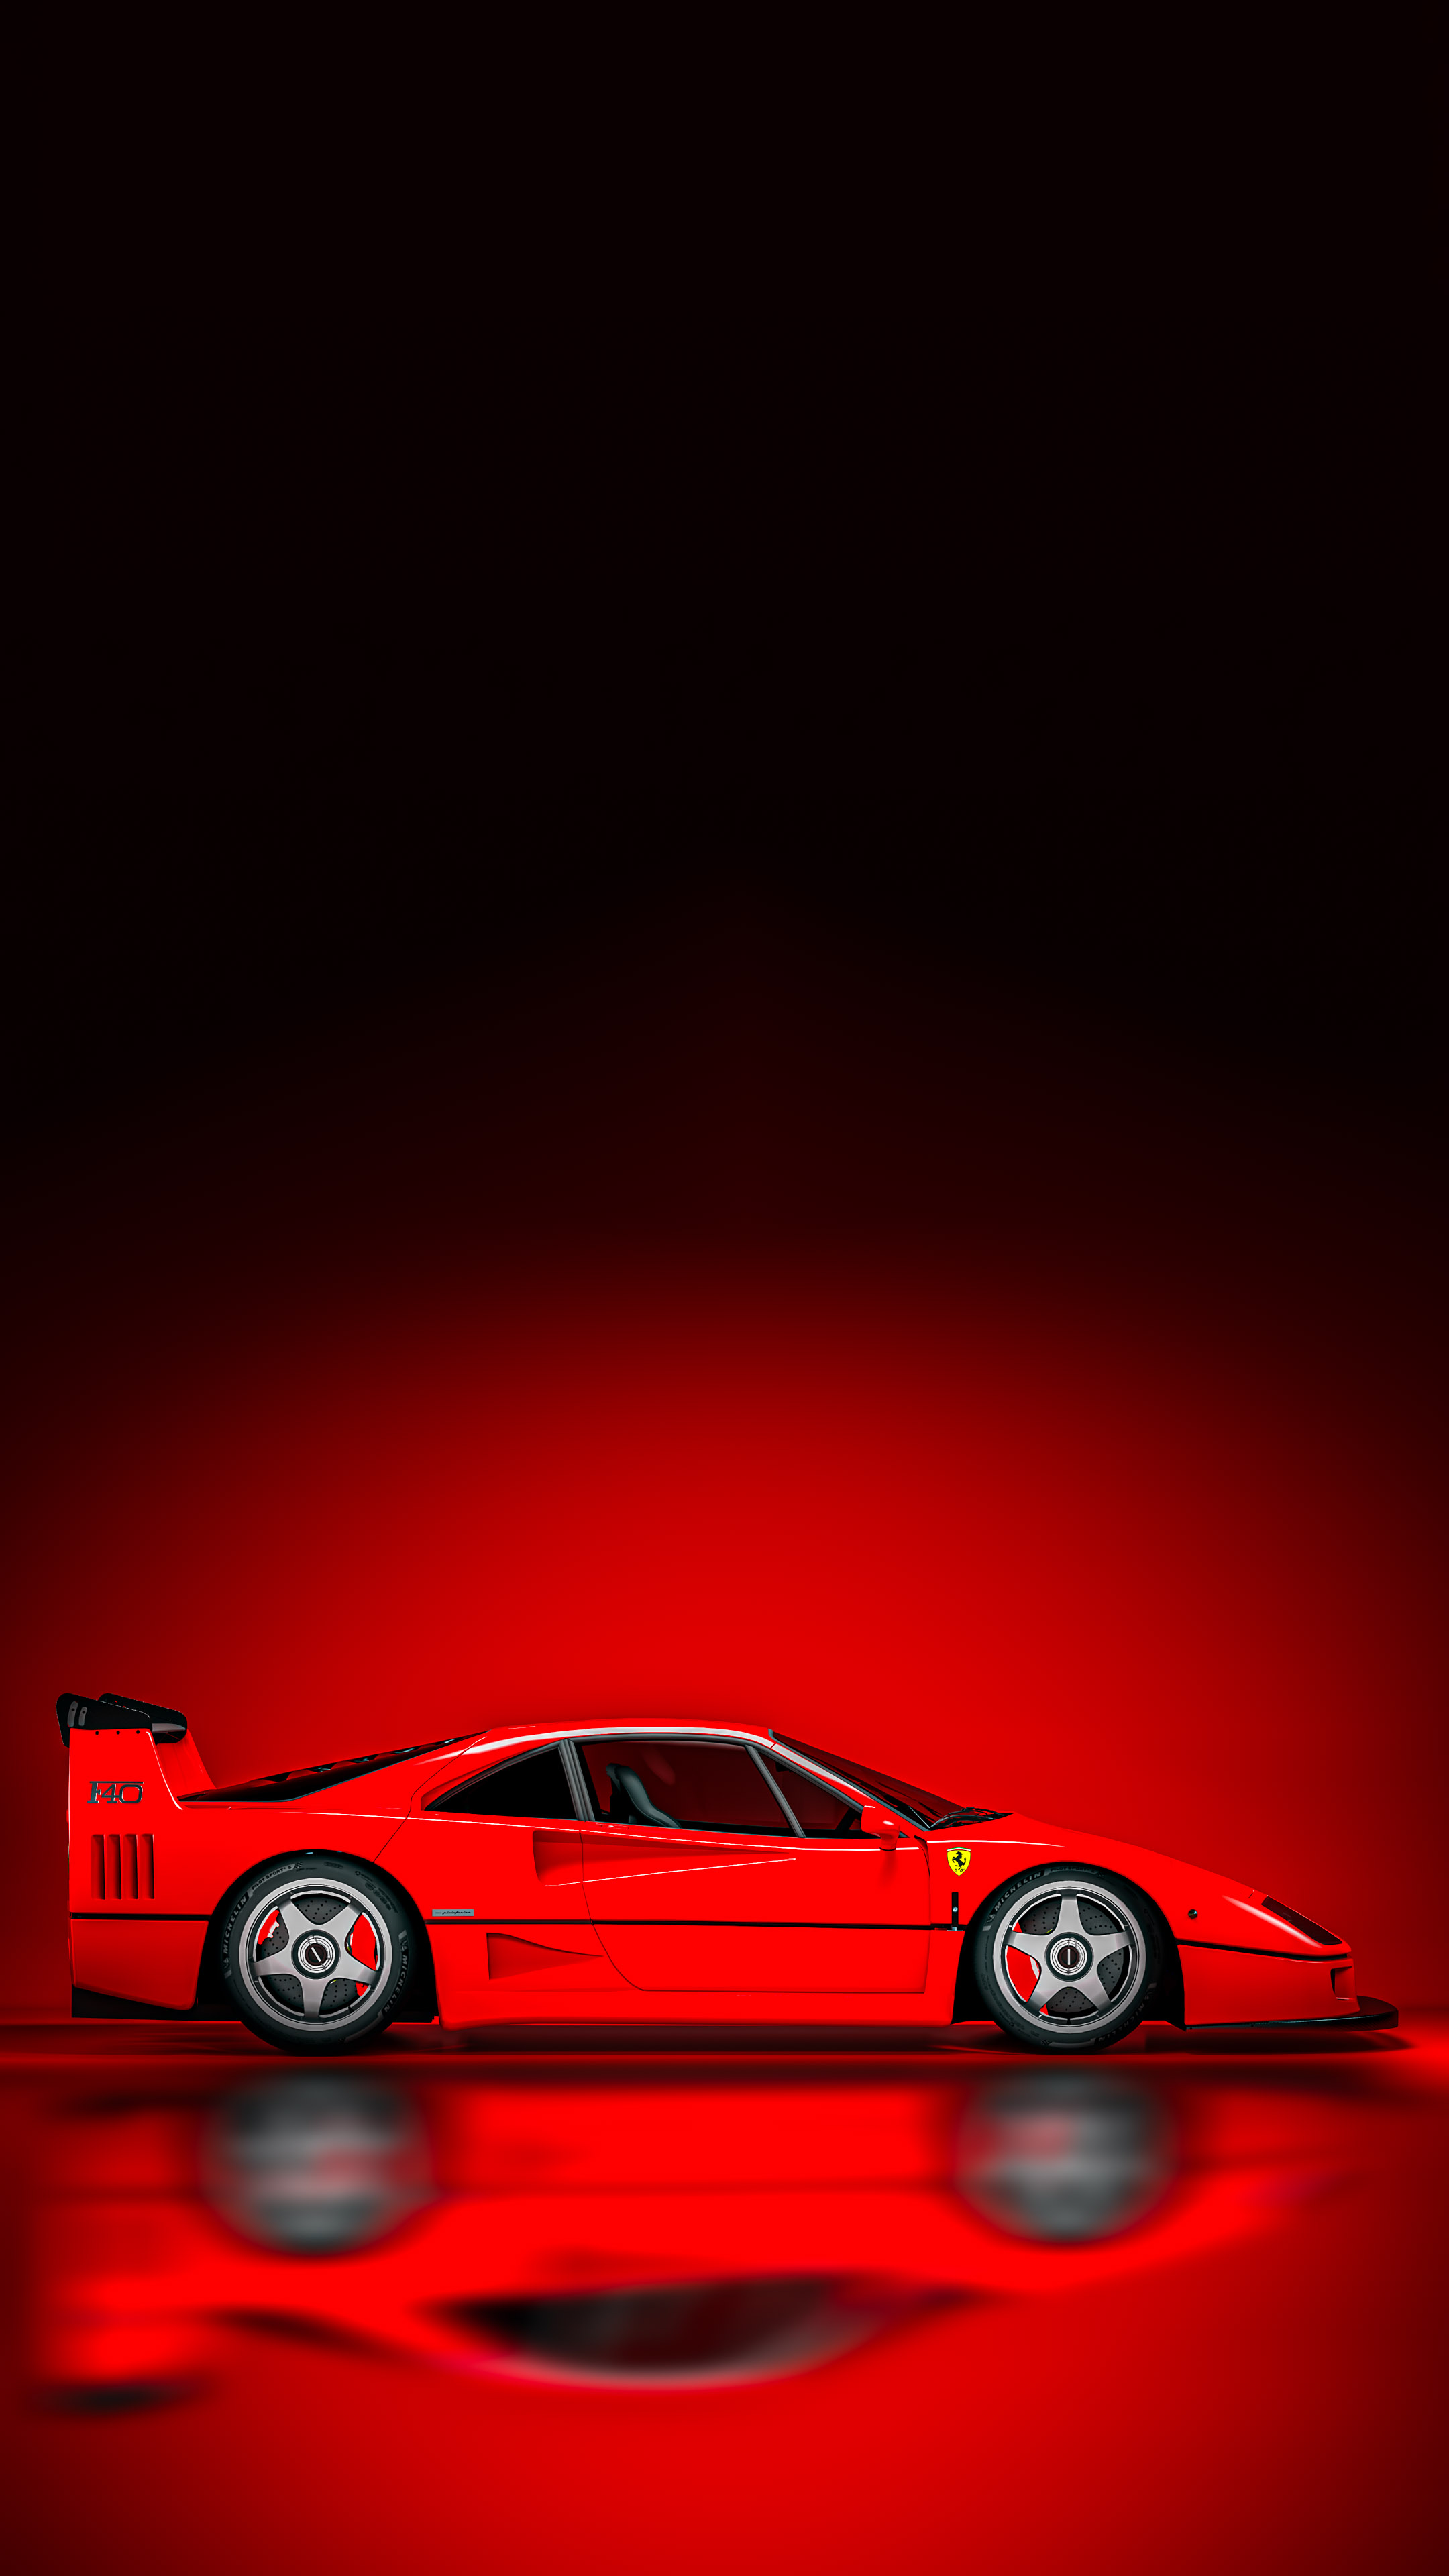 Embrace the timeless allure of classic cars with the car wallpaper, highlighting the legendary Ferrari F40, a symbol of automotive history, perfectly suited for your iPhone.